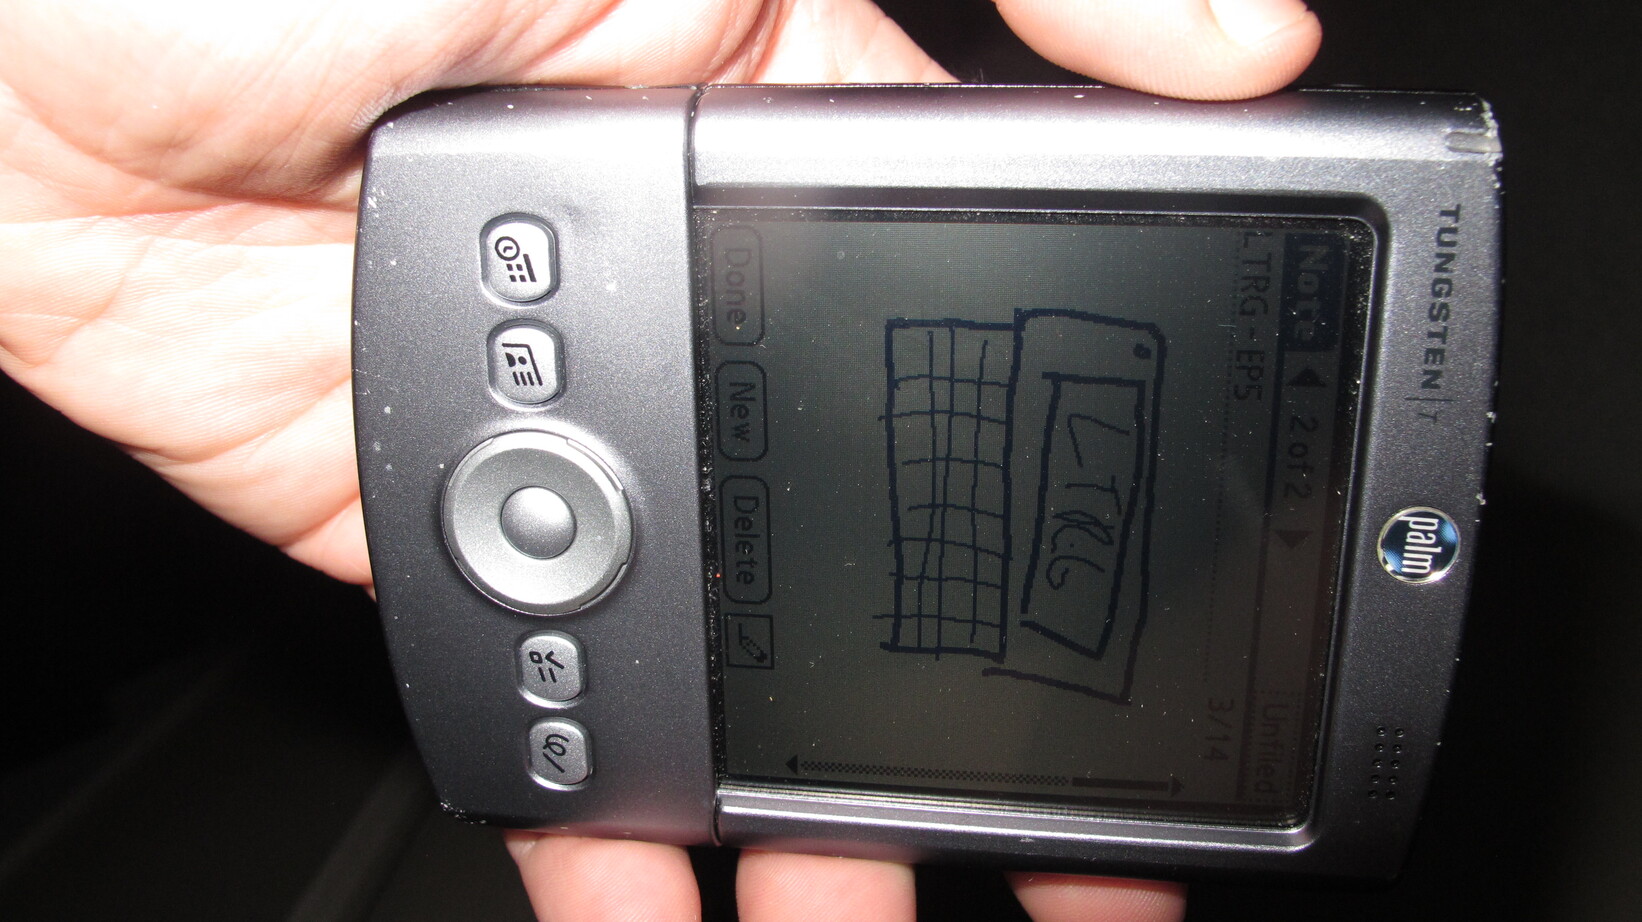 A Palm Tungsten T displaying a crude LTRG Logo.